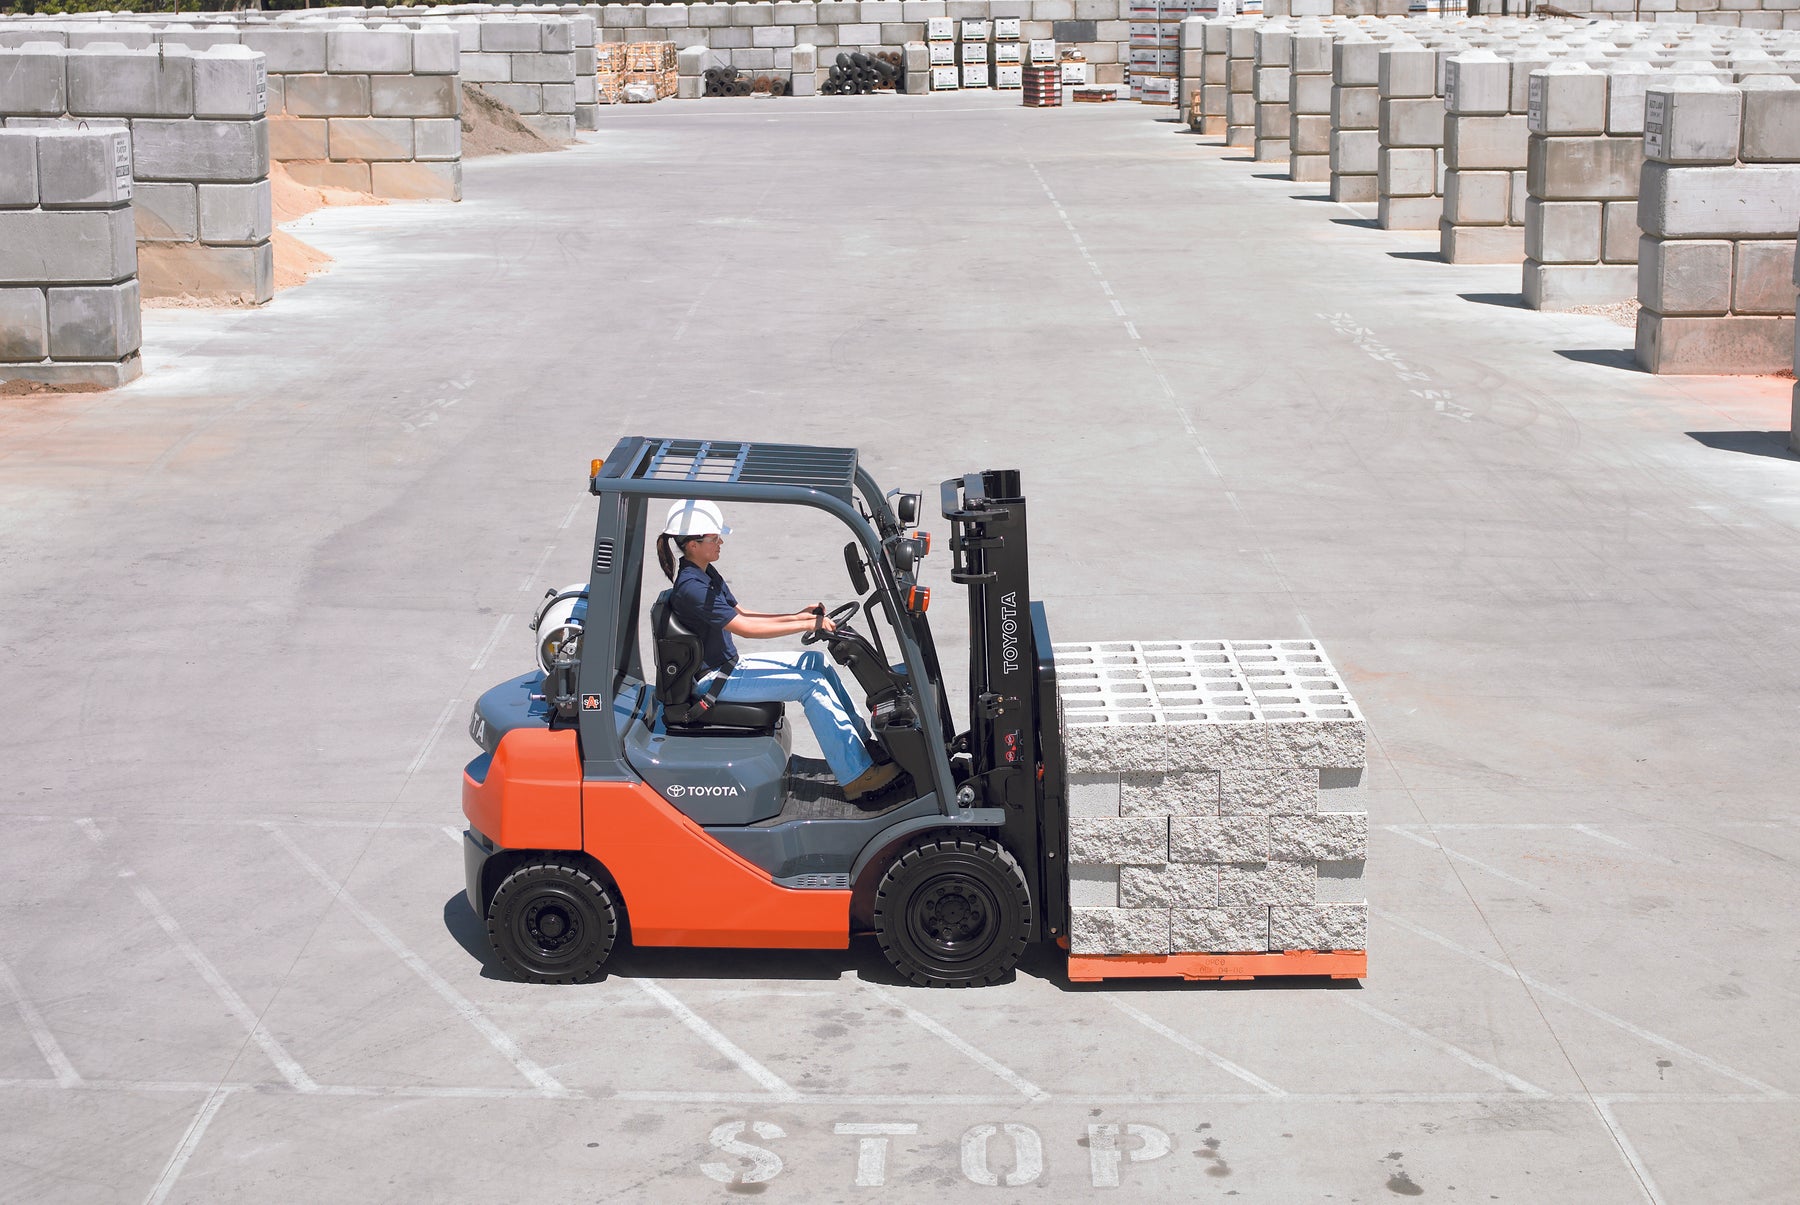 Why Forklifts Tip Over